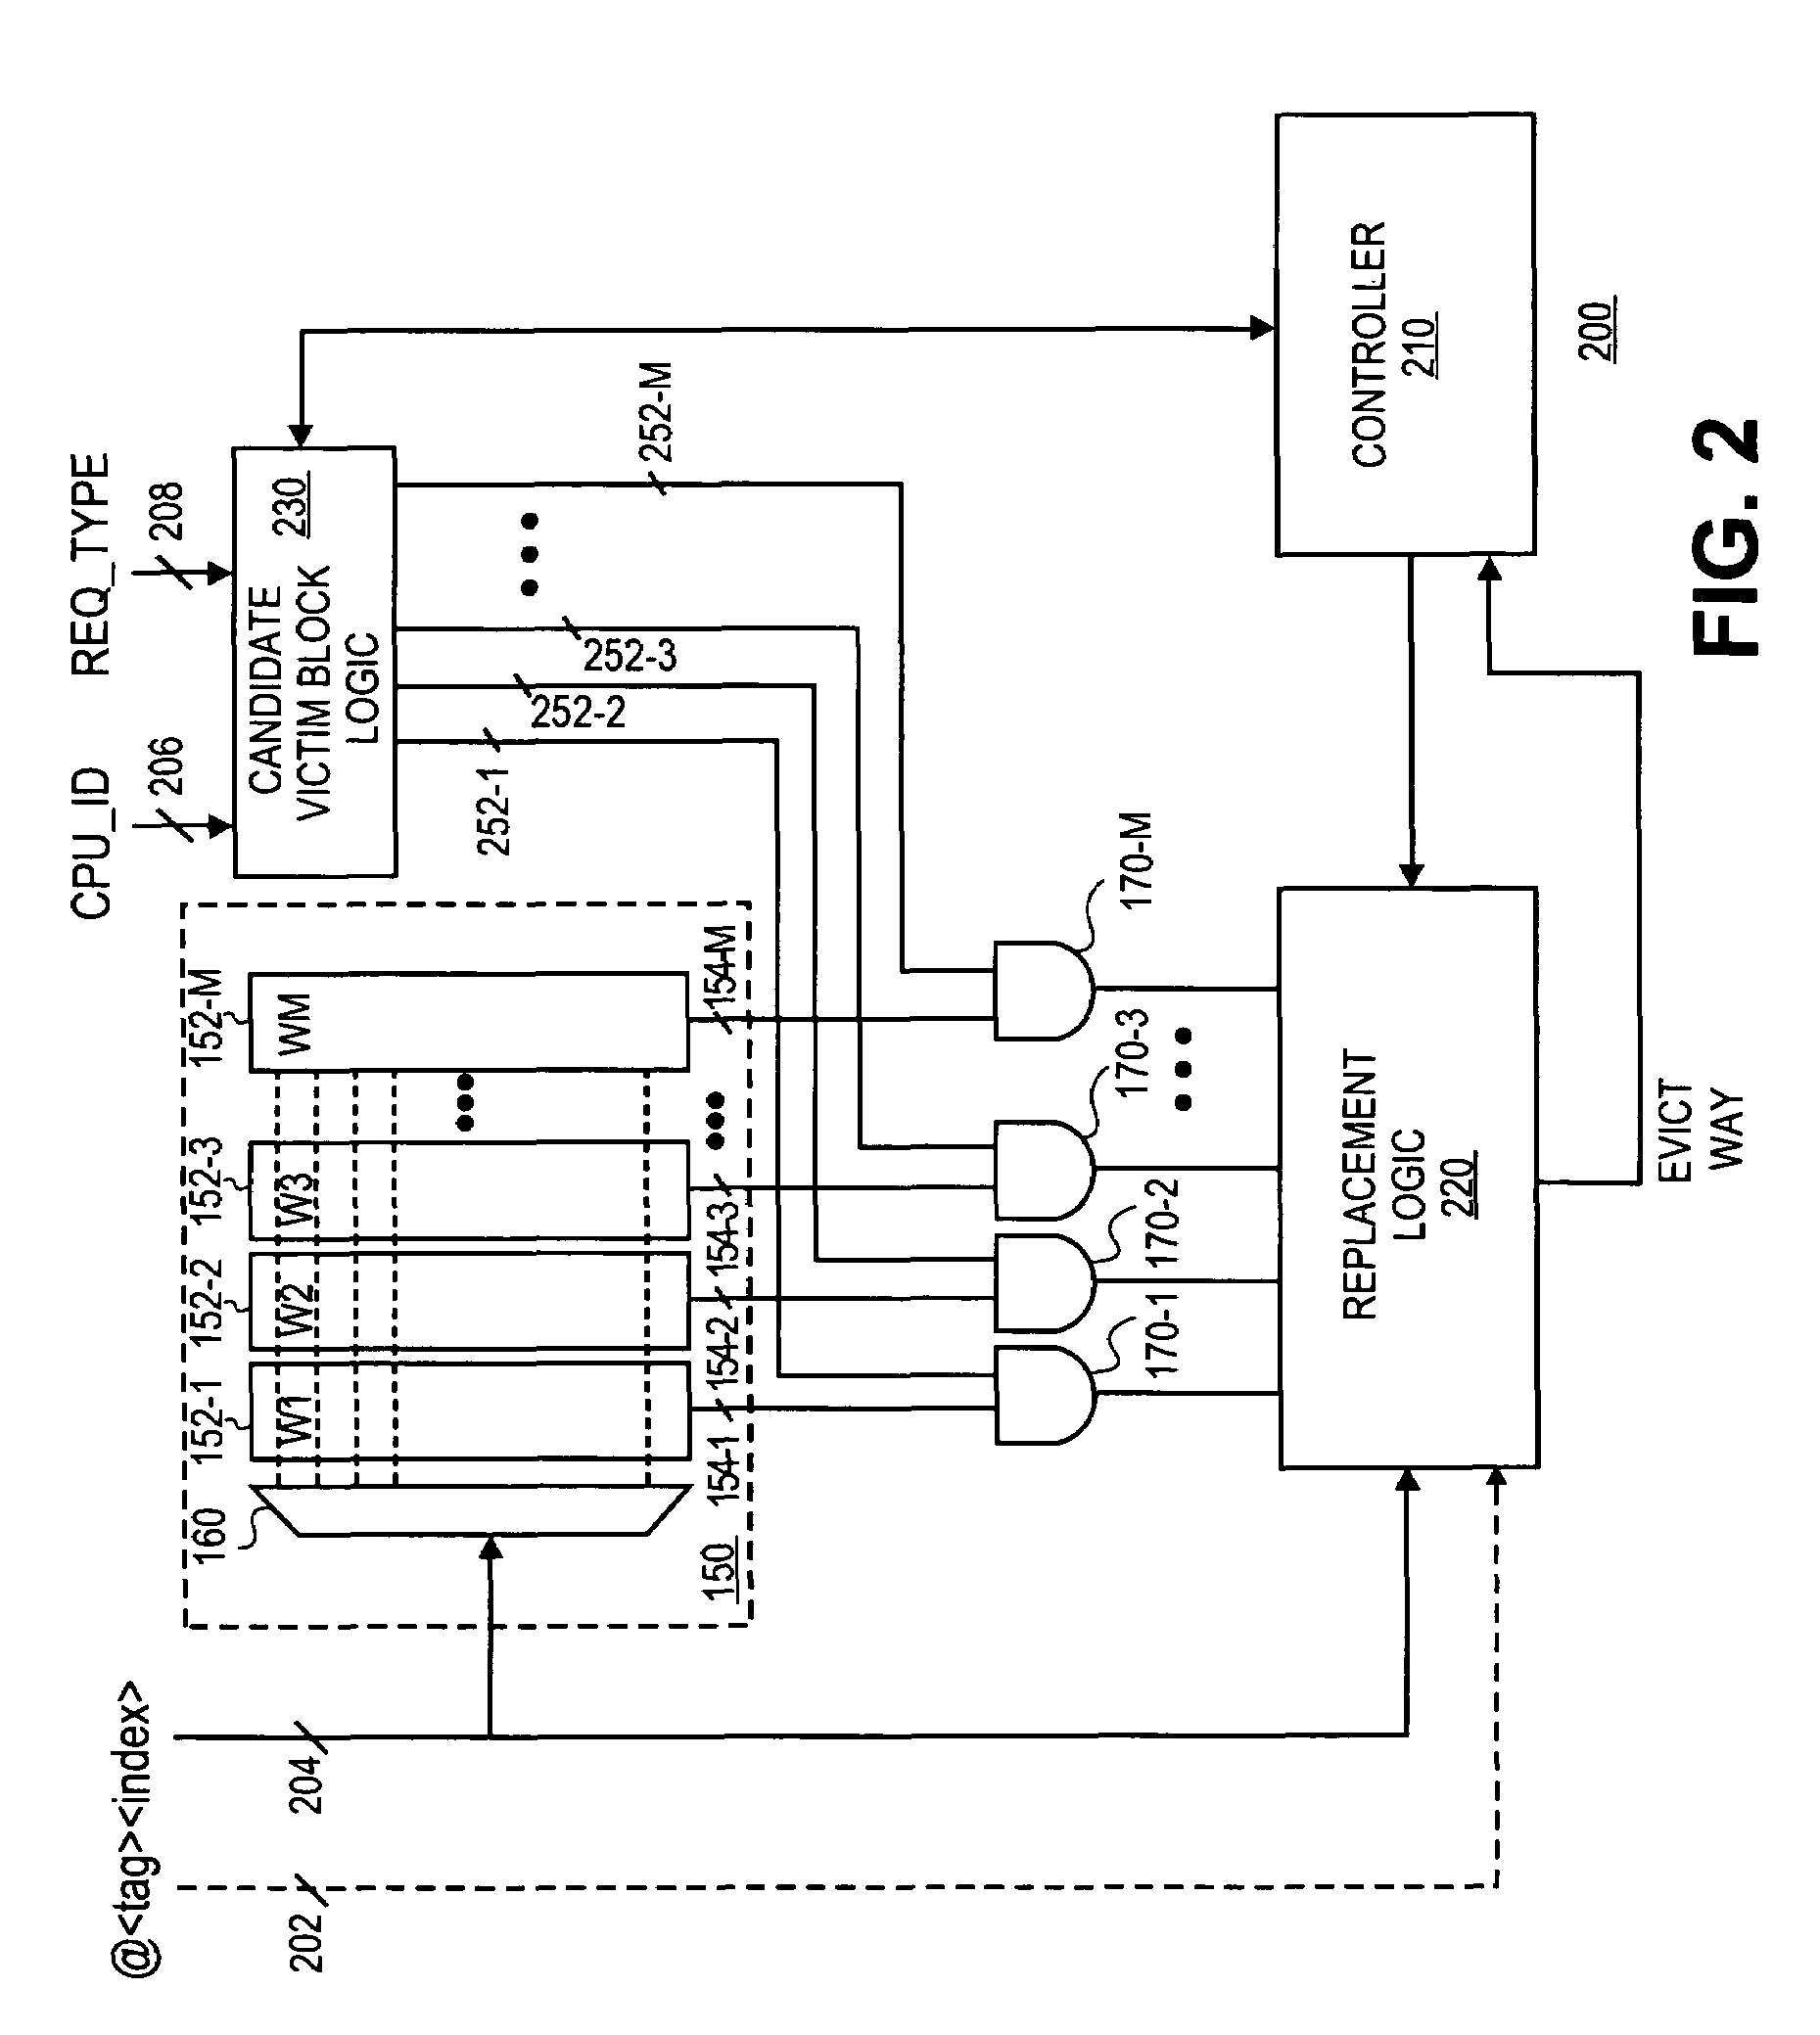 Apparatus and method for partitioning a shared cache of a chip multi-processor